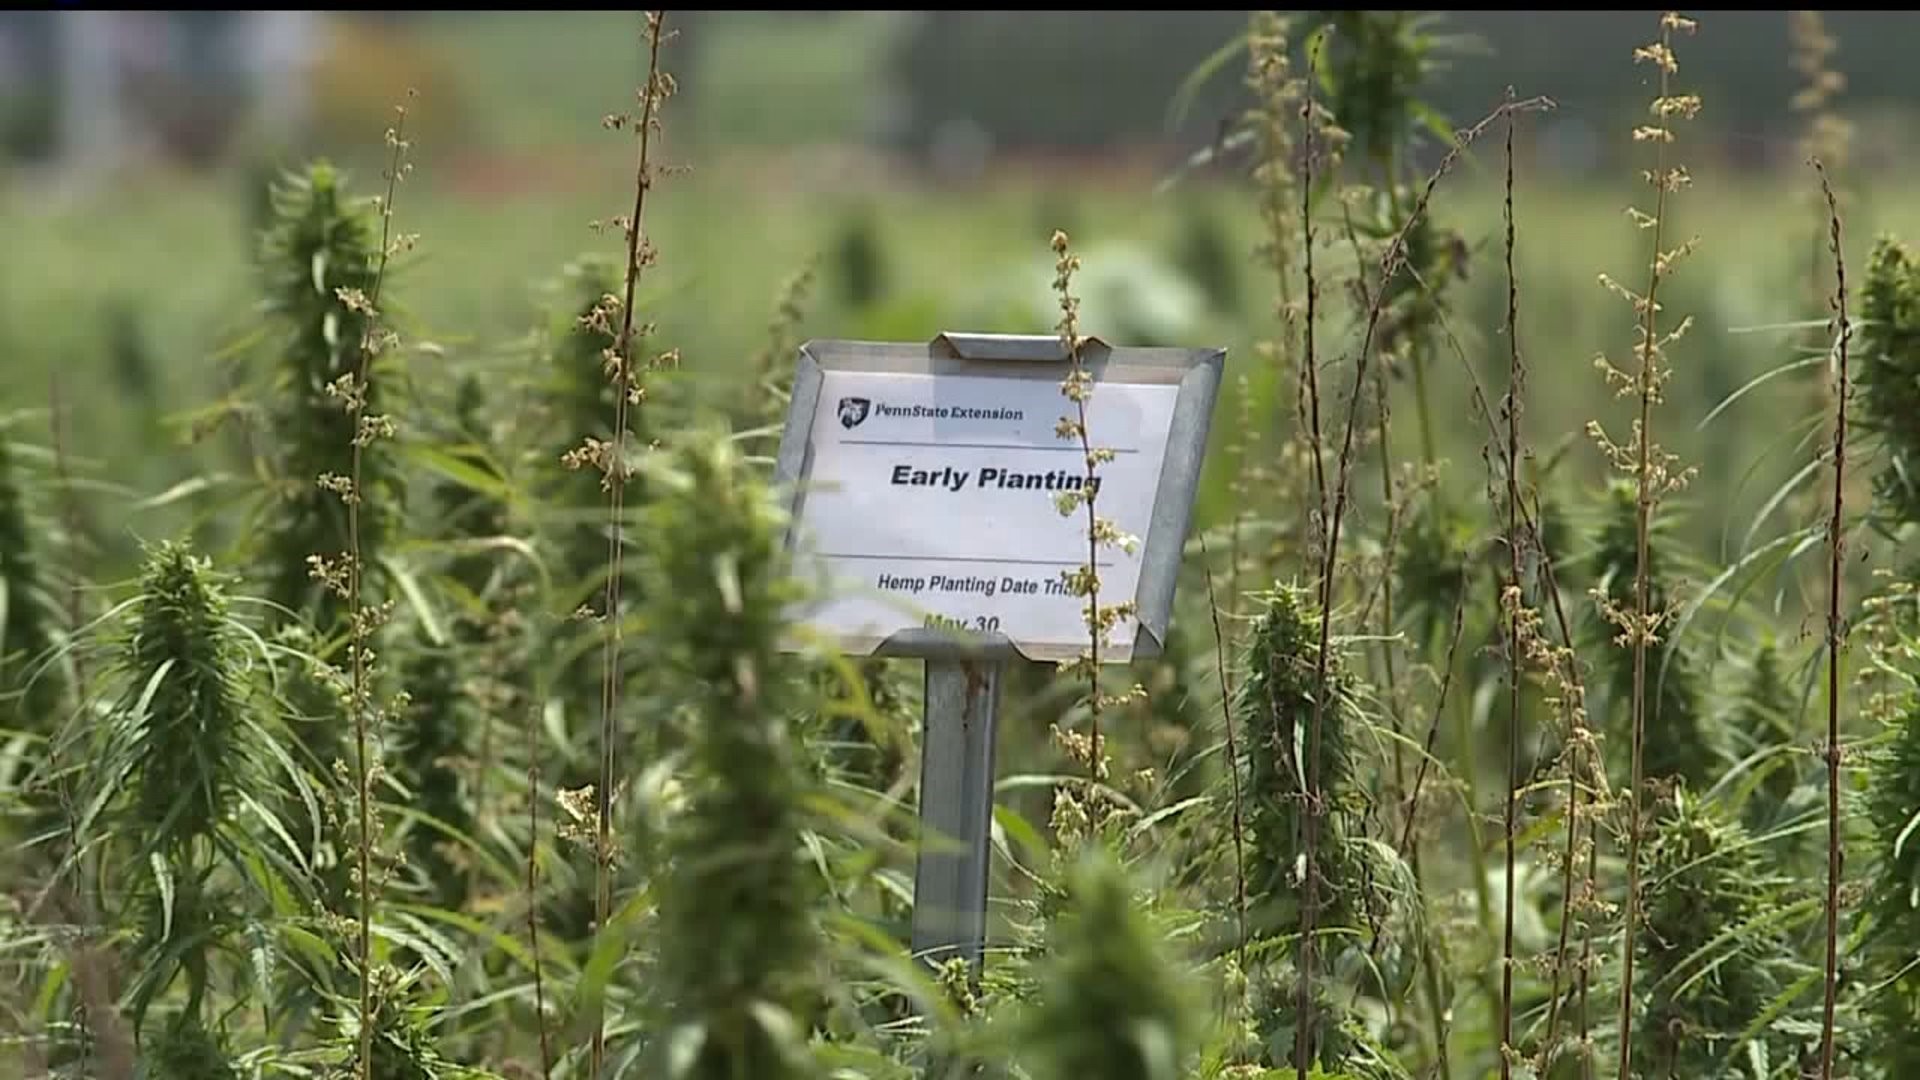 Business owners see the benefits of legal hemp being grown in the state